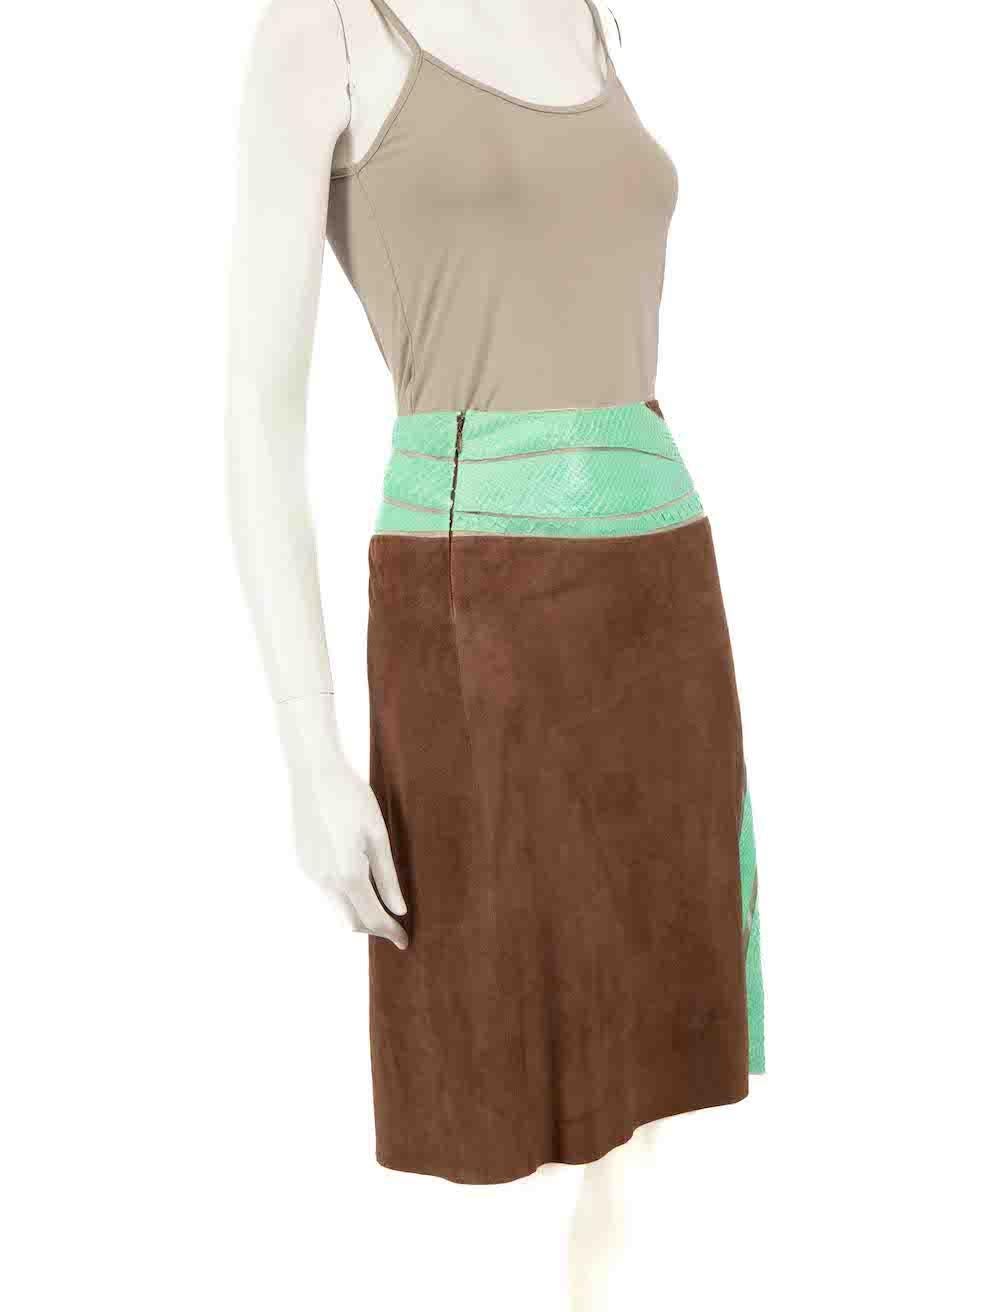 CONDITION is Very good. Hardly any visible wear to skirt is evident on this used Gianni Versace designer resale item.
 
 
 
 Details
 
 
 Vintage
 
 Brown and green
 
 Suede and python leather
 
 Knee length skirt
 
 Contrast panelled
 
 Back zip